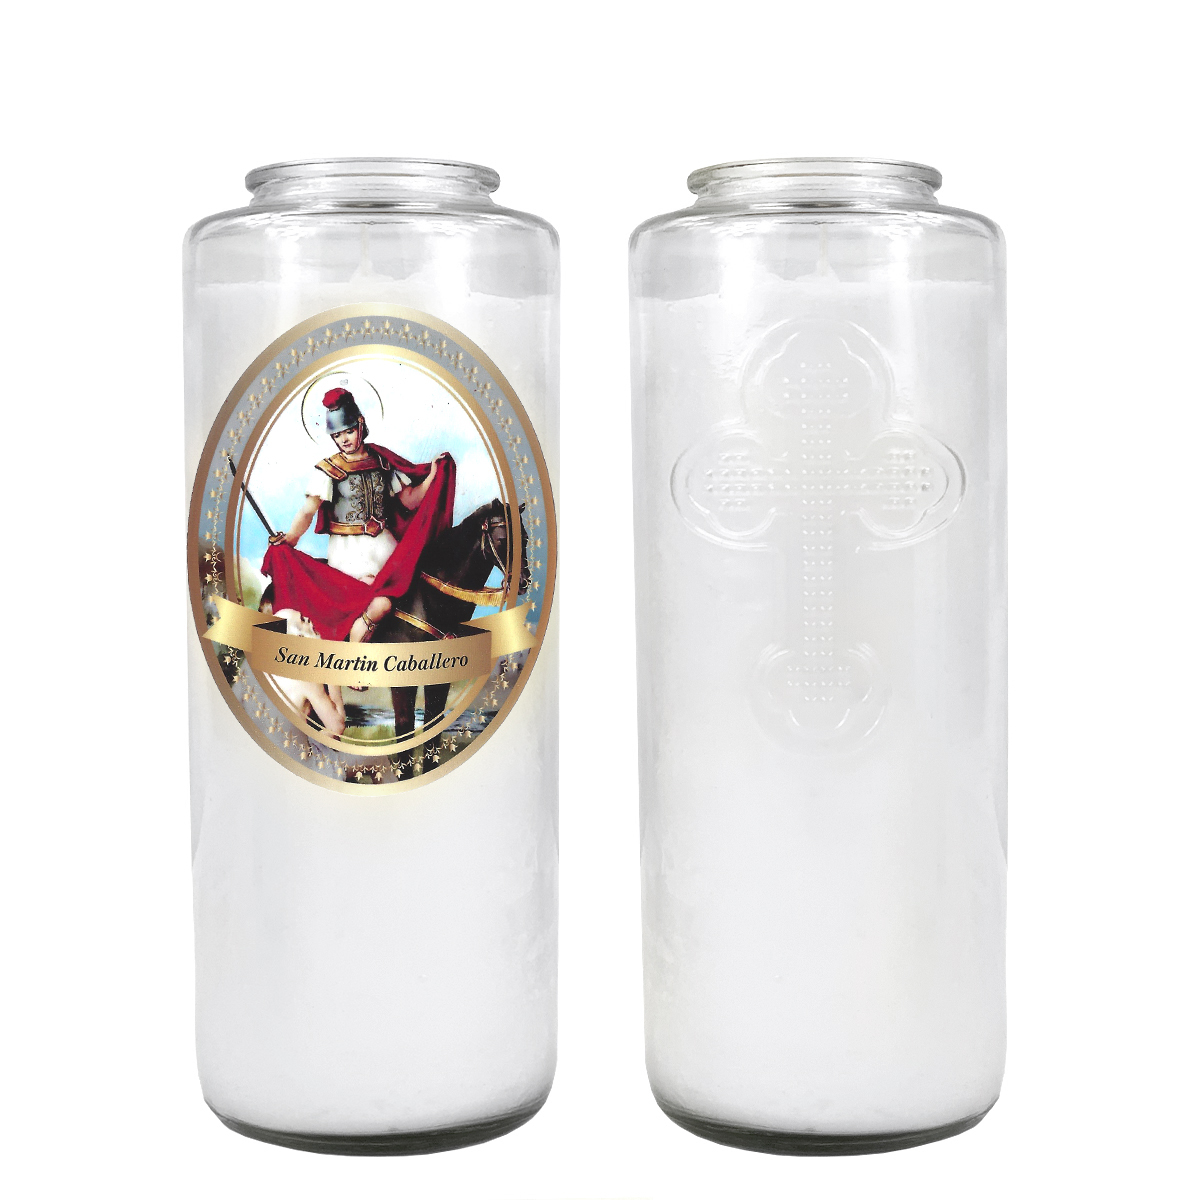 SAN MARTIN CABALLERO 5 DAY CANDLE W/ REMOVABLE LABEL